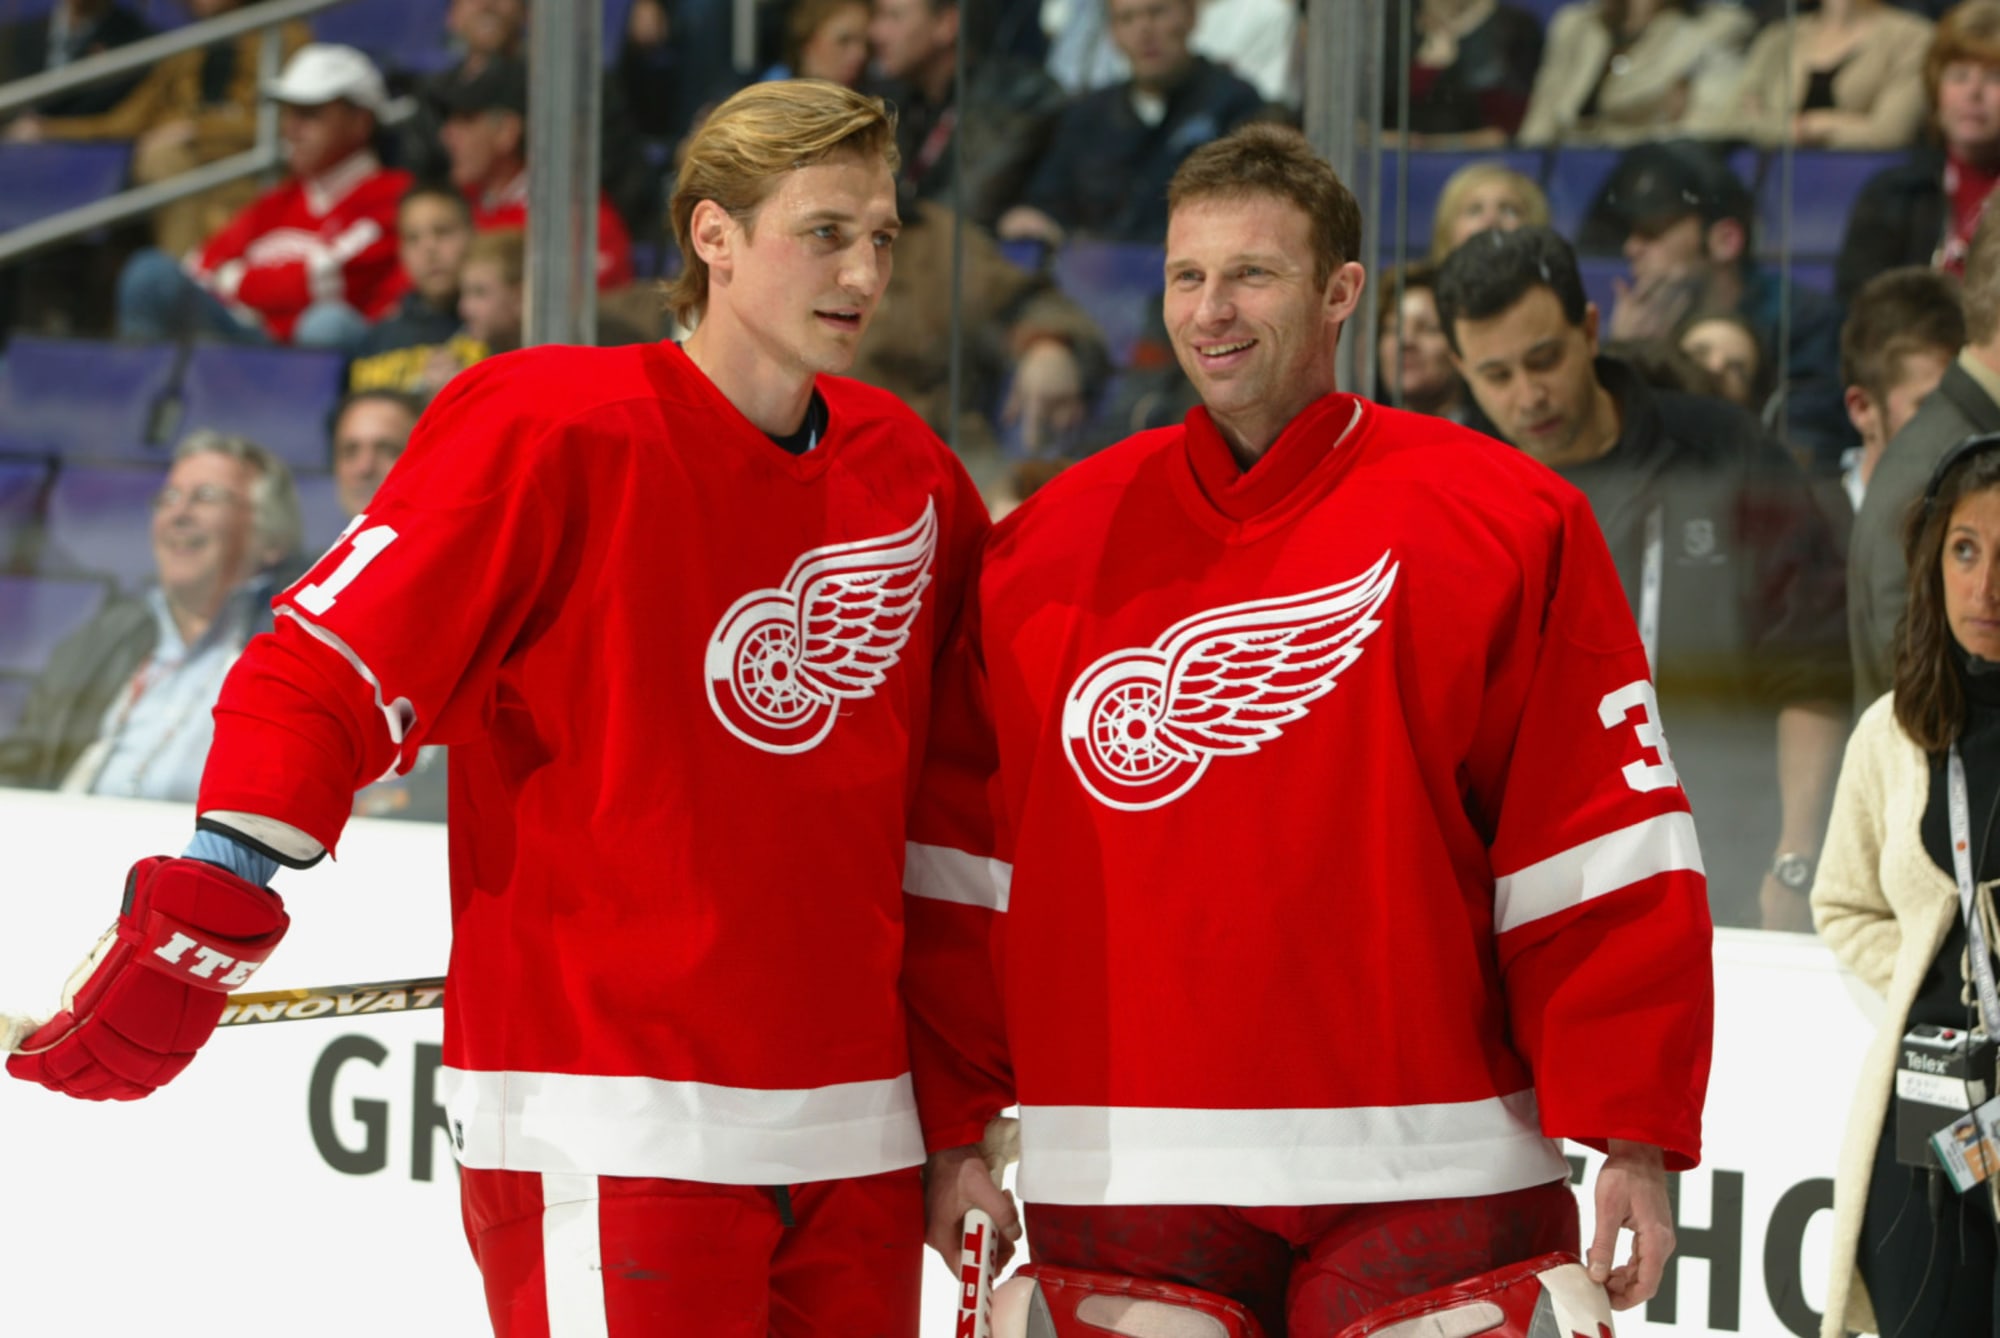 Red Wings rookie sets fastest lap record at NHL skills competition